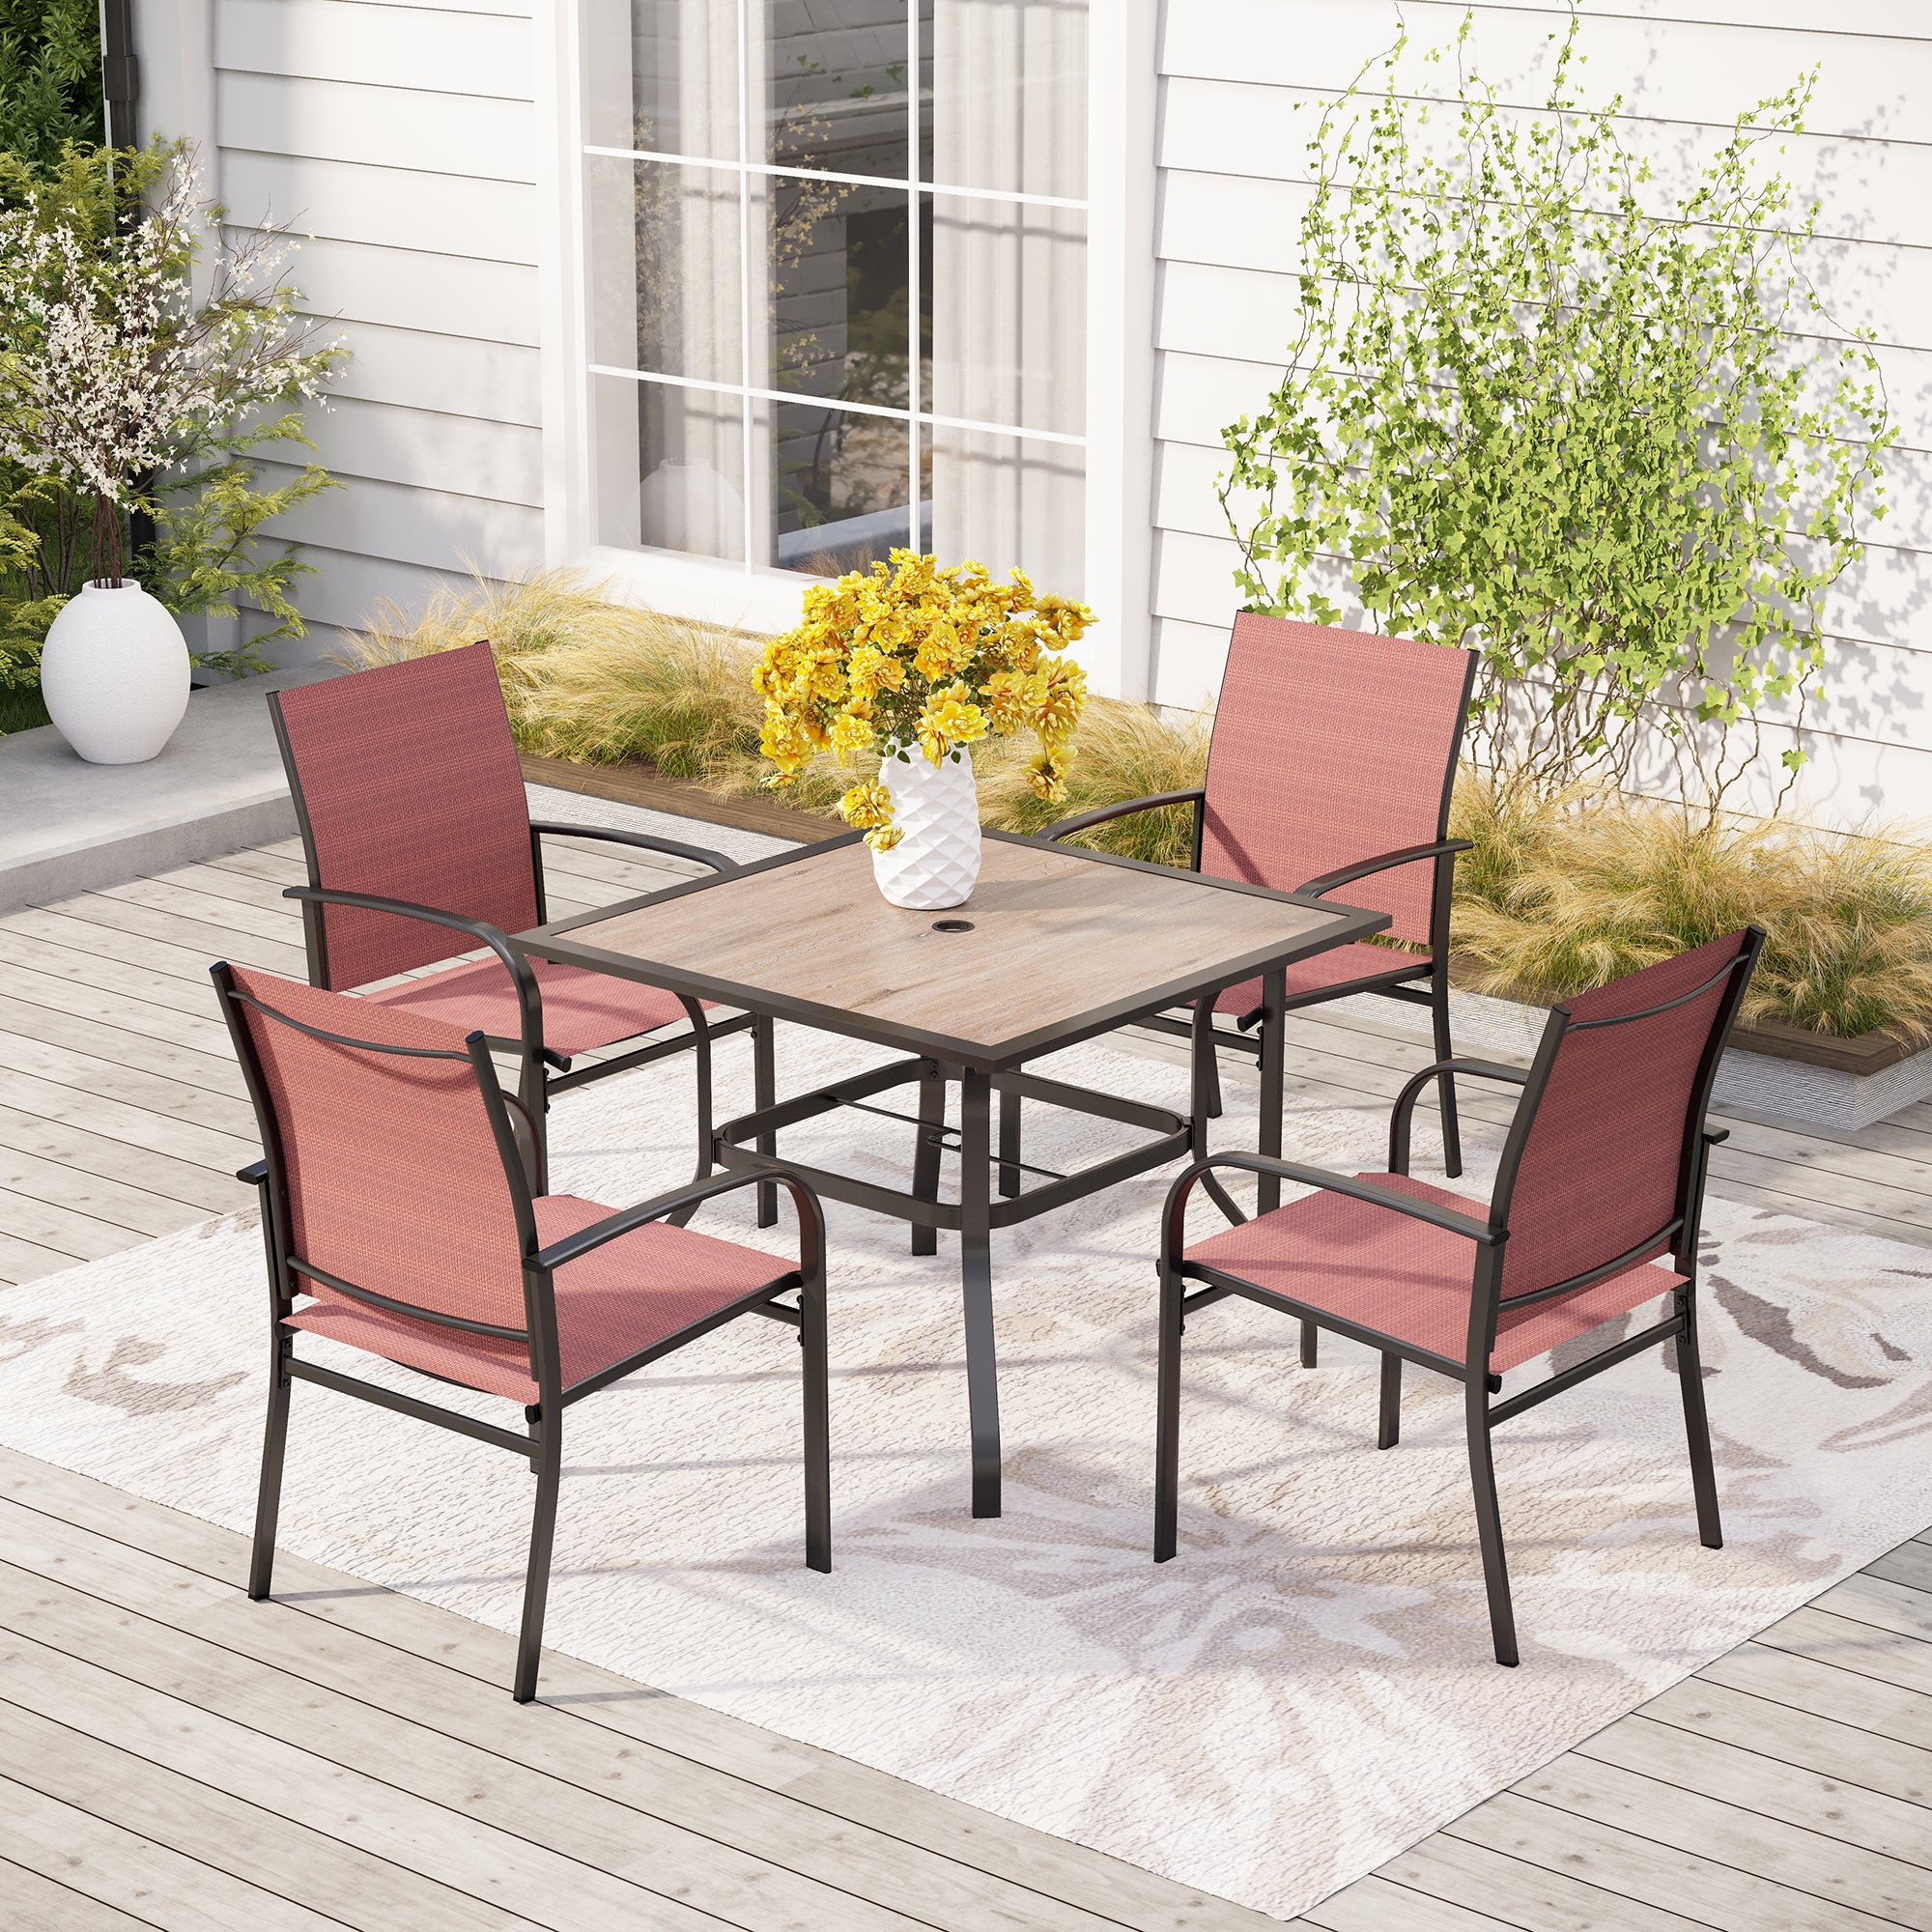 Sophia & William 5-Piece Patio Dining Sets Wood-look Square Table & Light Textilene Fixed Chair